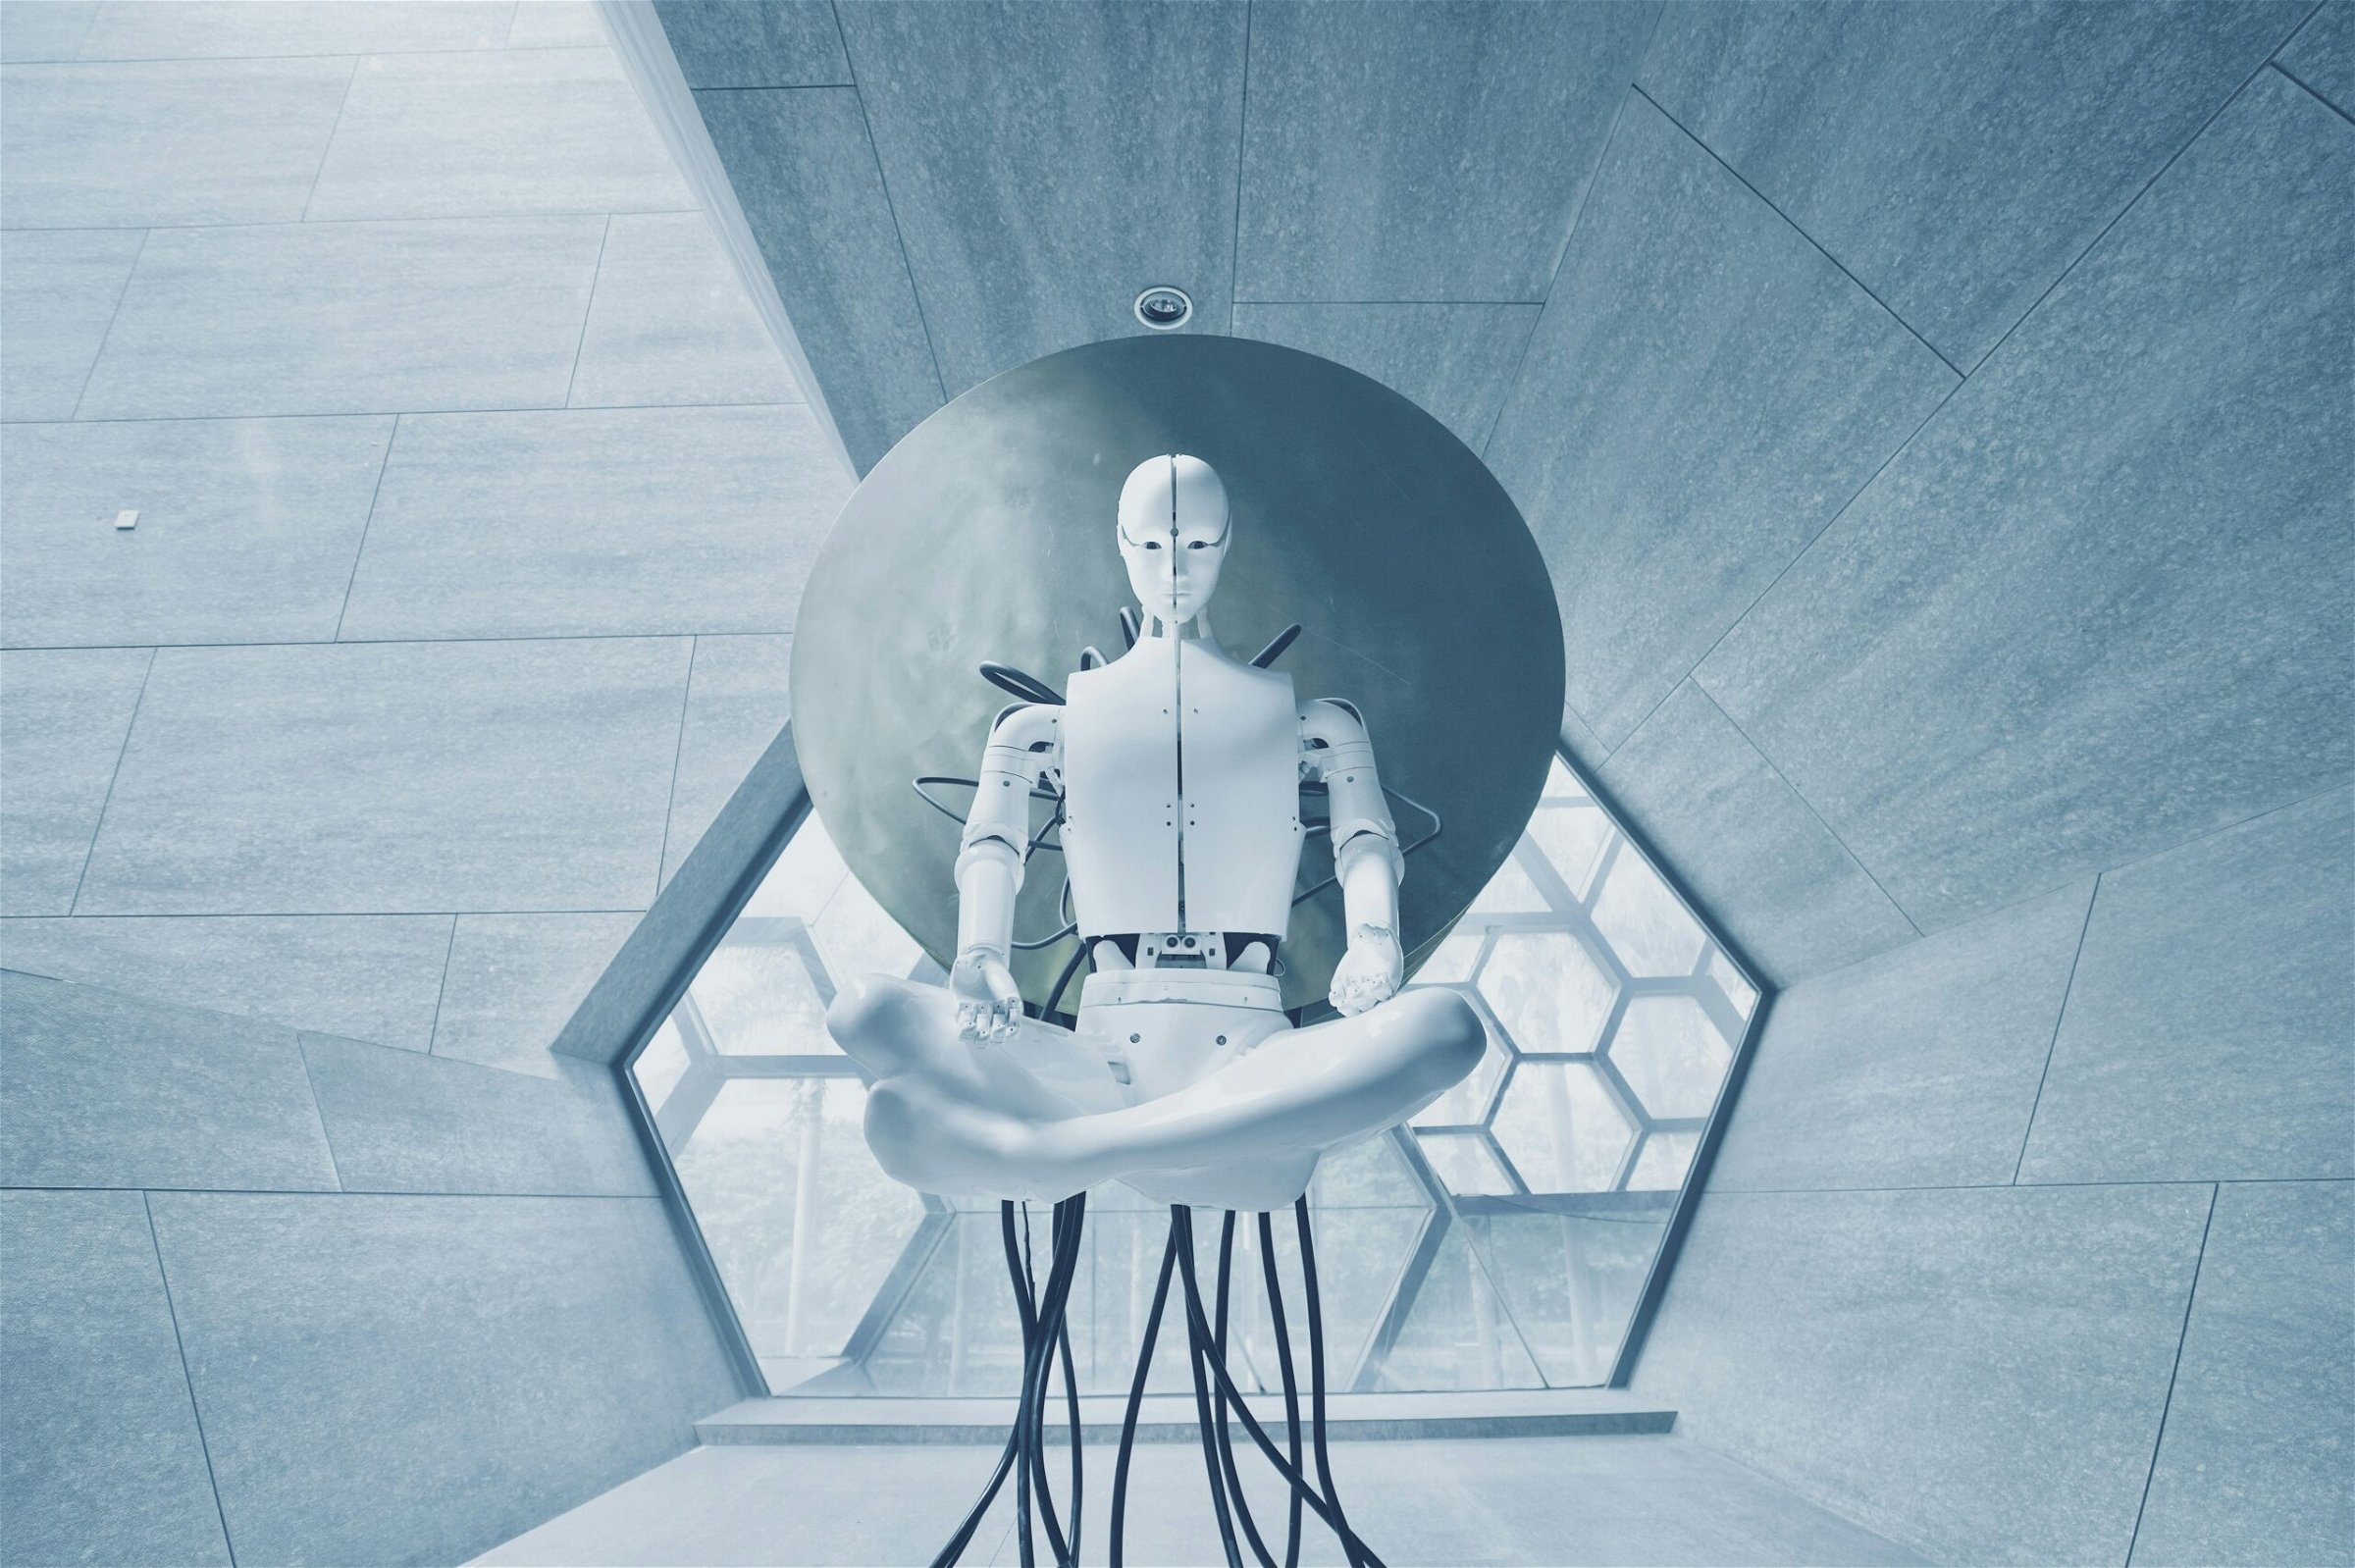 Image of a white robot sitting on a chair in a weird futuristic room - Destination Certification